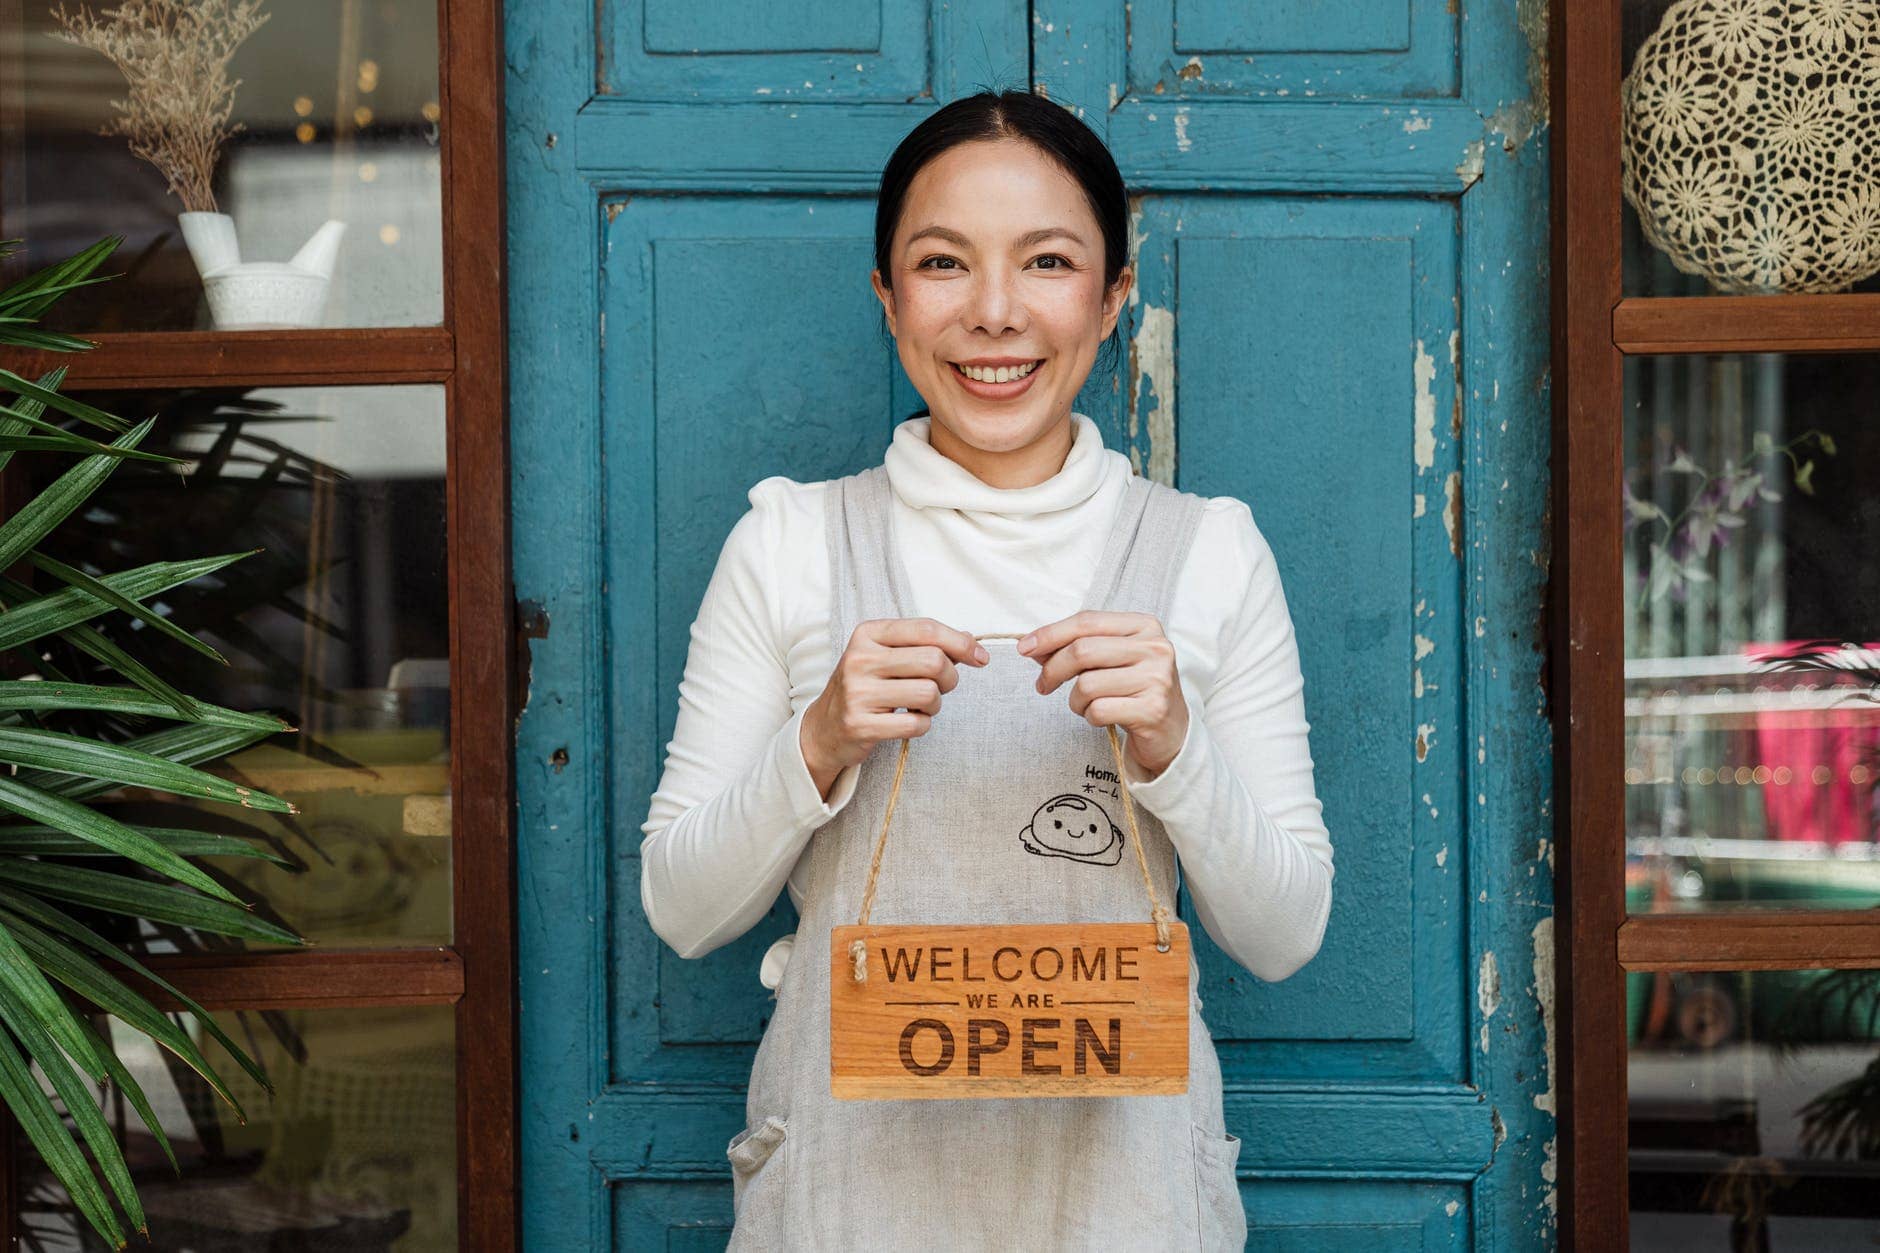 Simple Life Style 1: Apron-ed shop owner holding a welcome we are open sign.  Photo by Ketut Subiyanto on Pexels.com